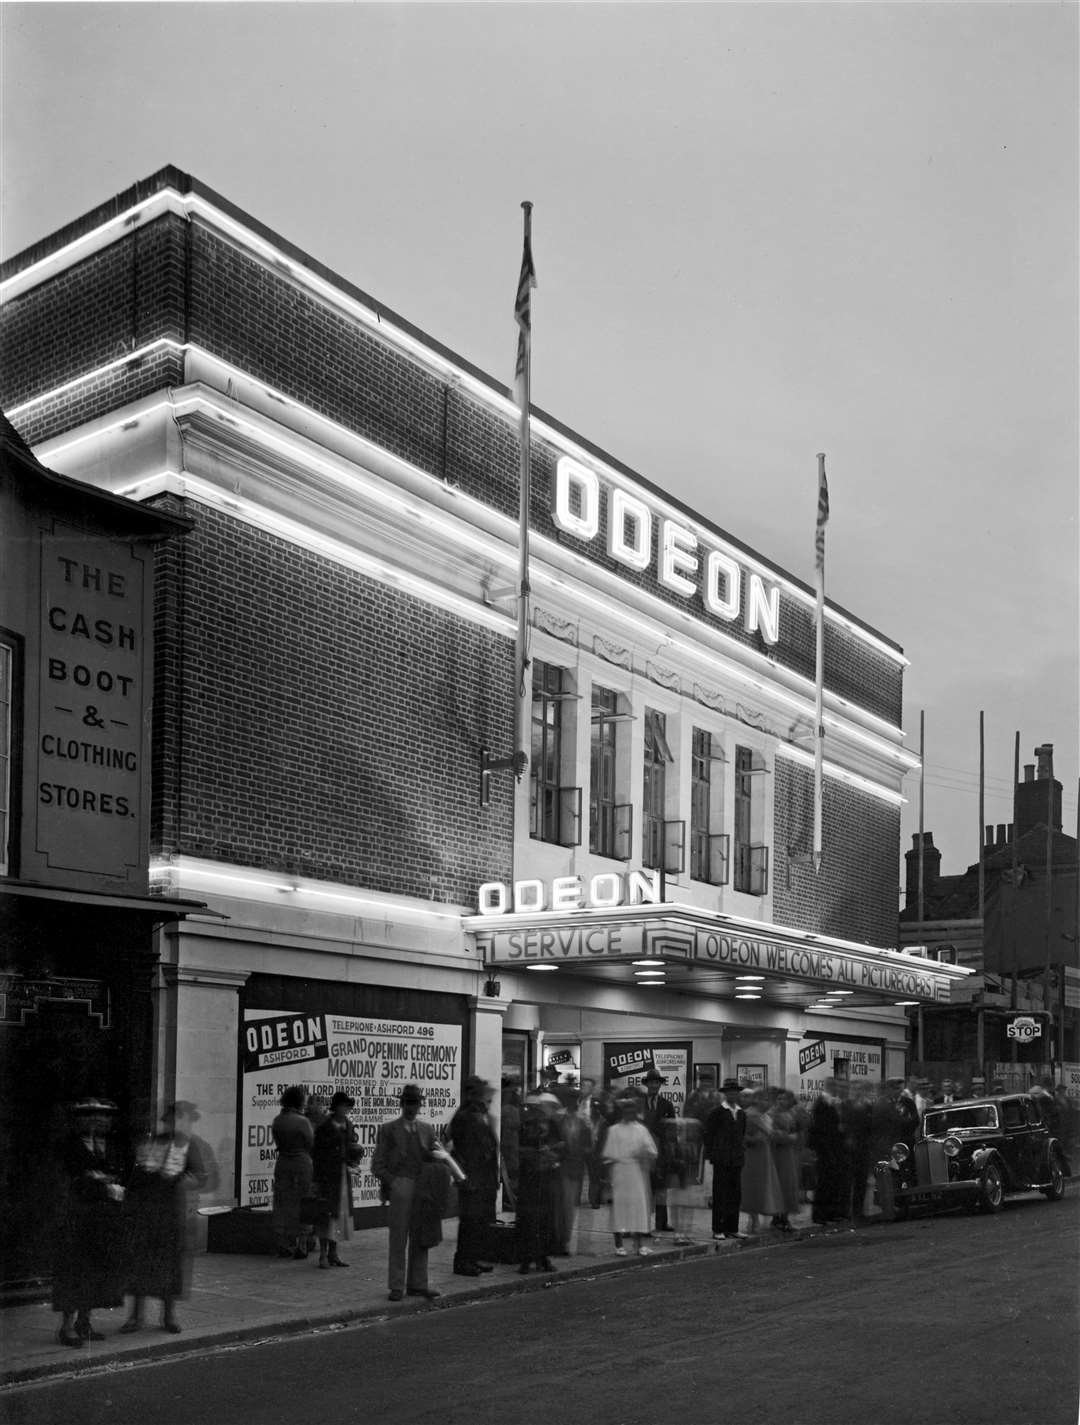 The opening night of the Odeon Cinema, in the Lower High Street, Ashford in 1936